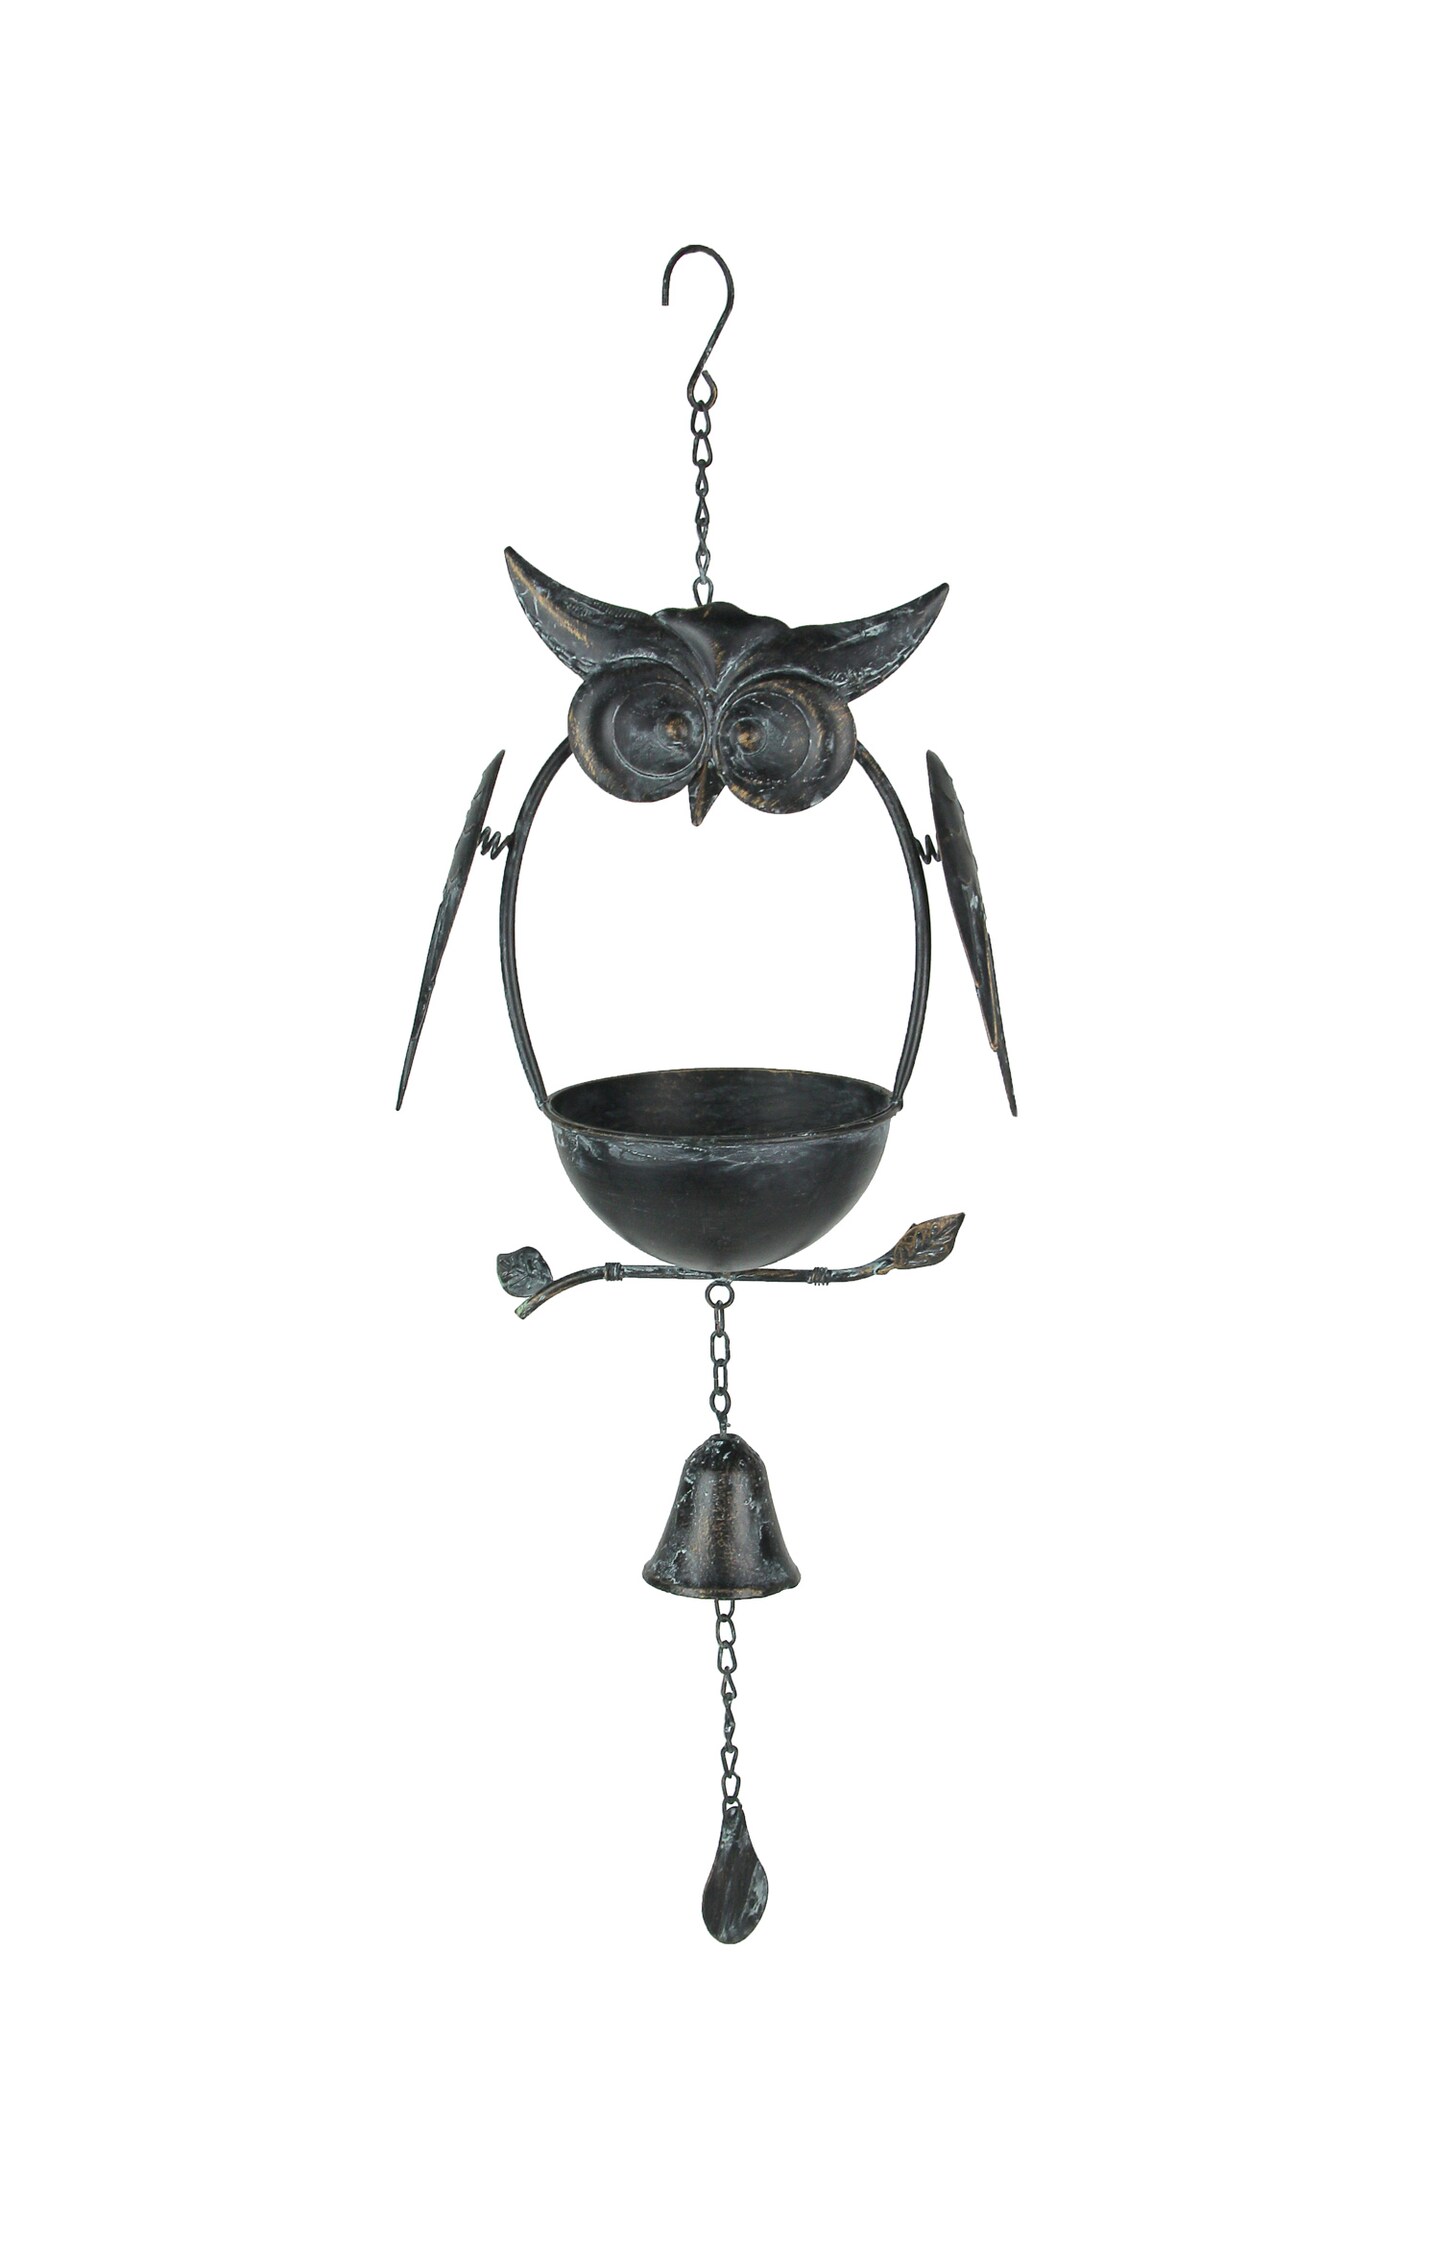 Rustic Weathered Metal Owl Hanging Bird Feeder With Bell Chime